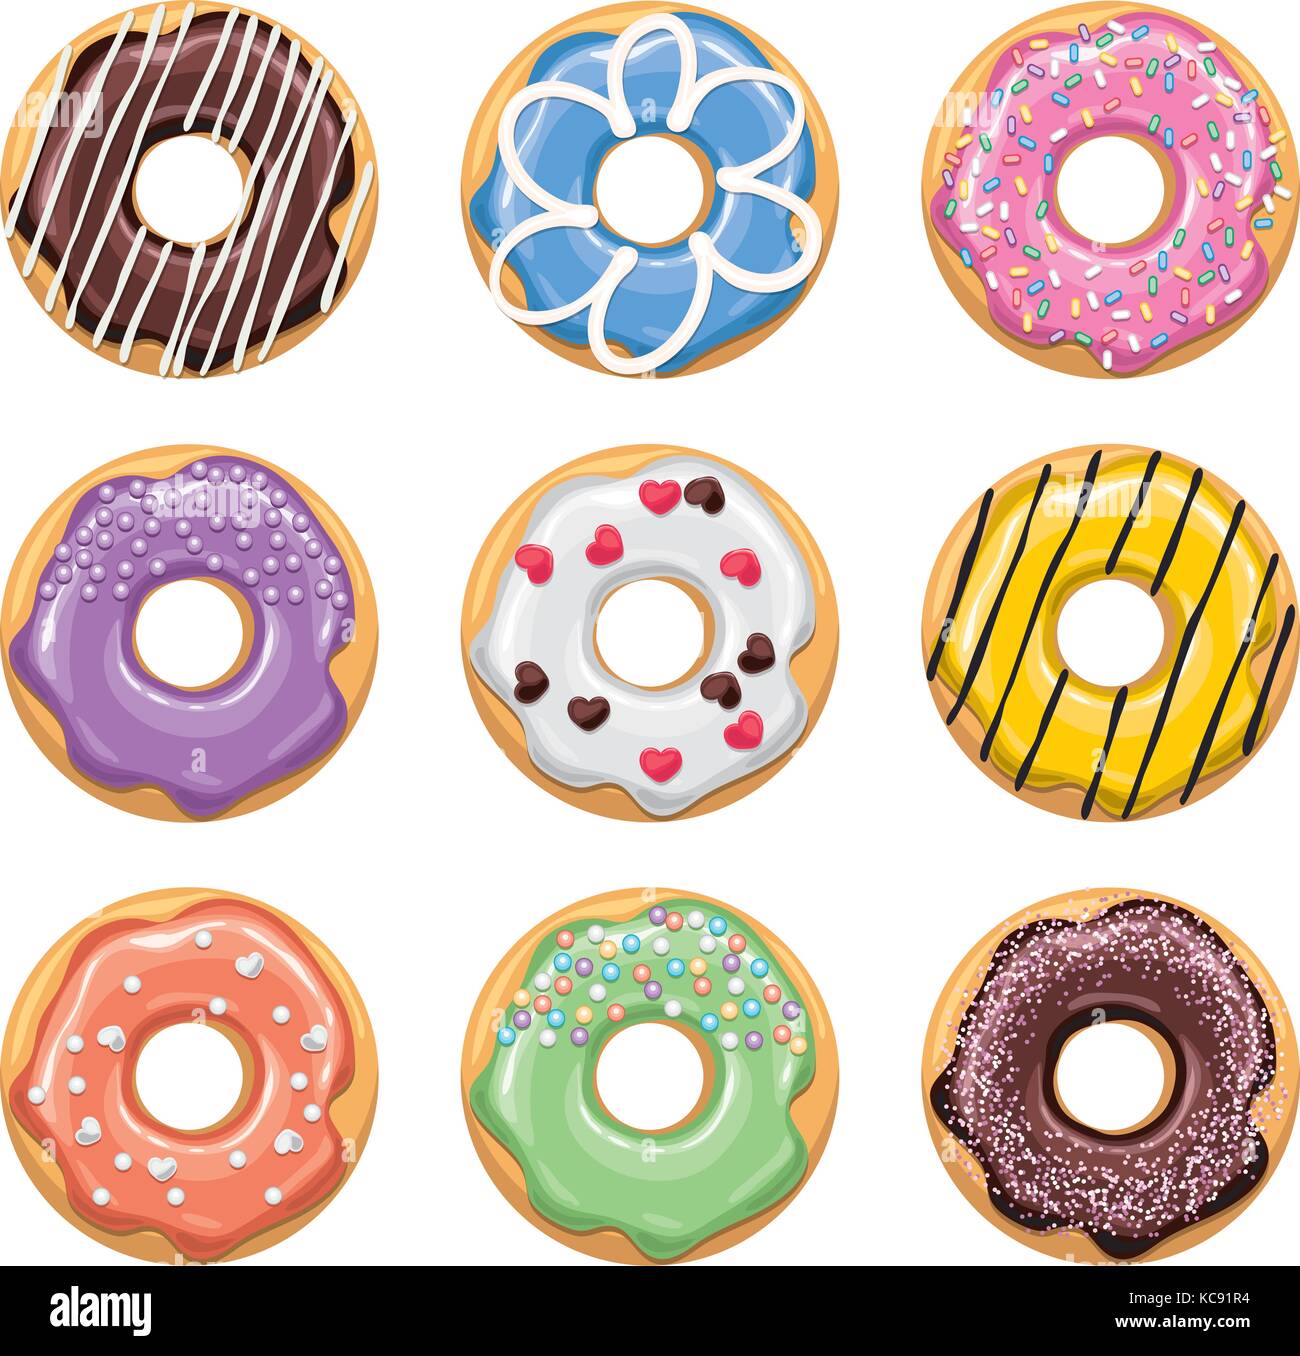 Vector Modern Flat Style Icons Of Glazed Colorful Donuts With Glaze Chocolate And Sprinkles 3708